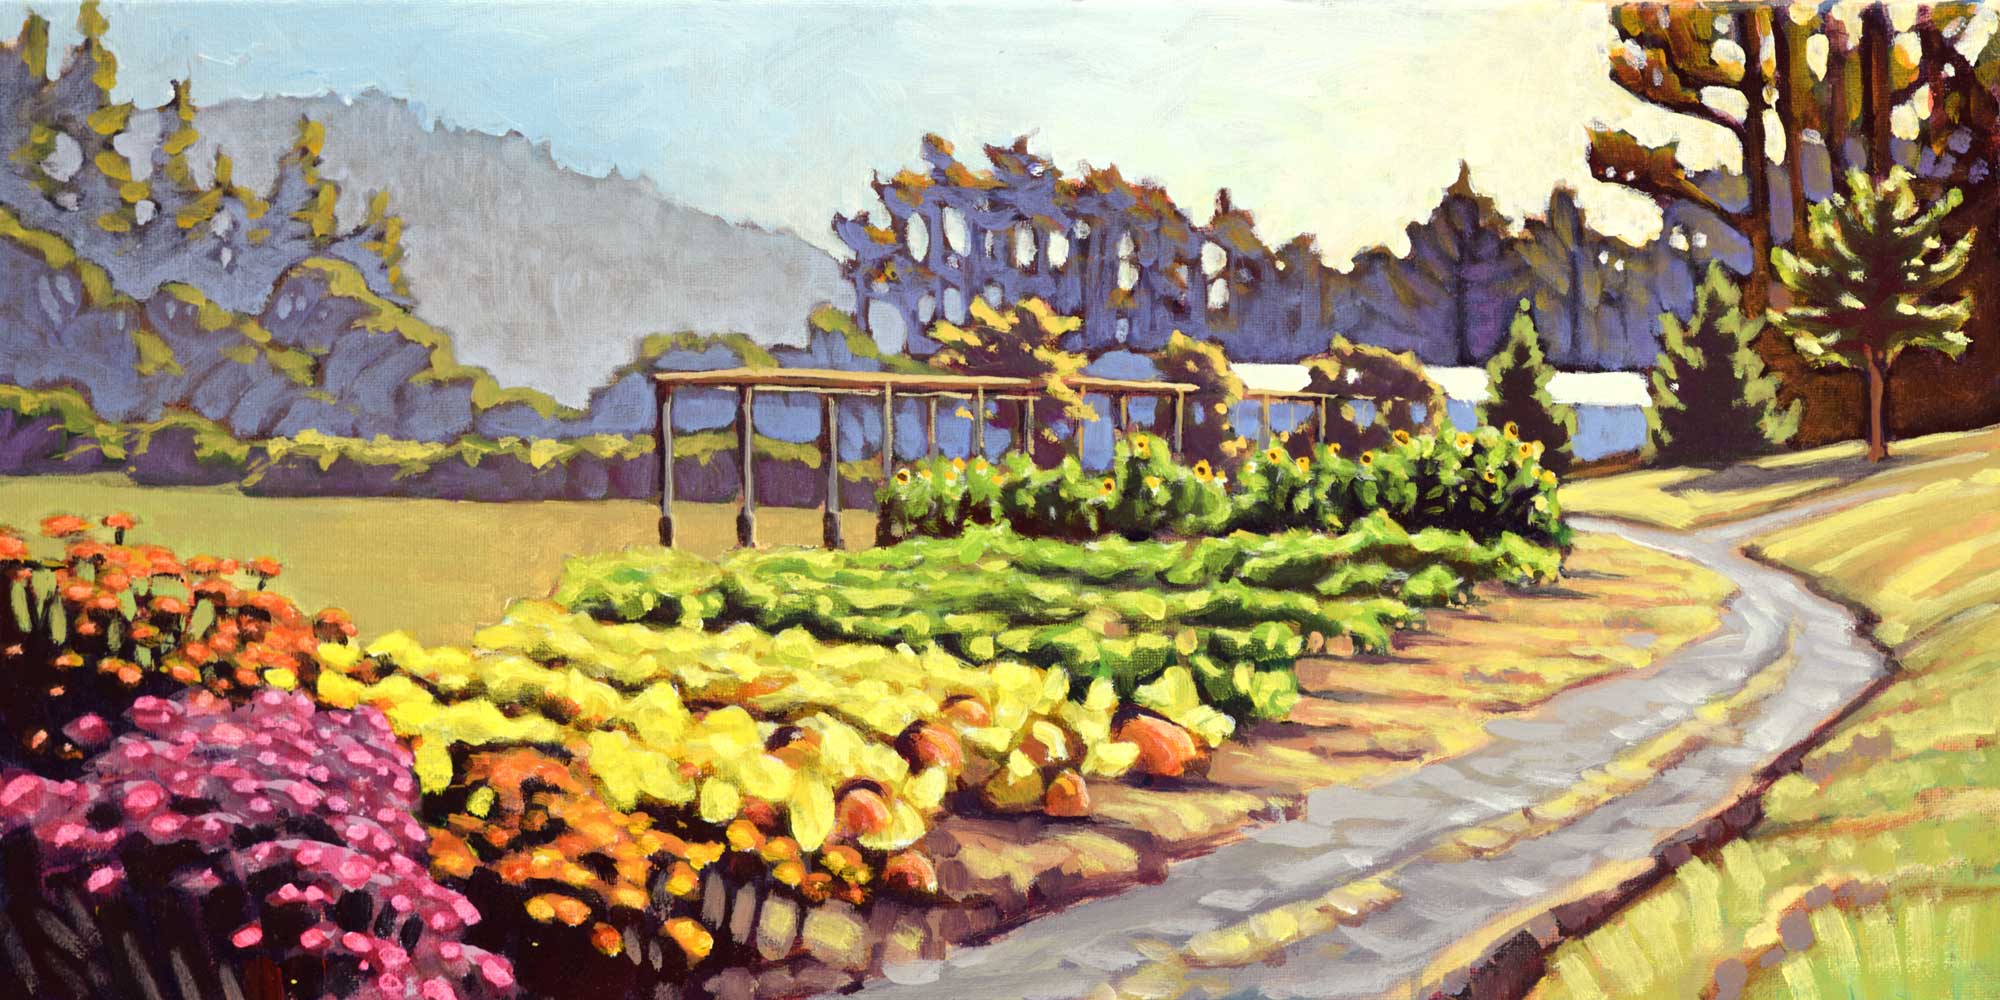 Plein air painting of the Humboldt Botanical Gardens in northern California